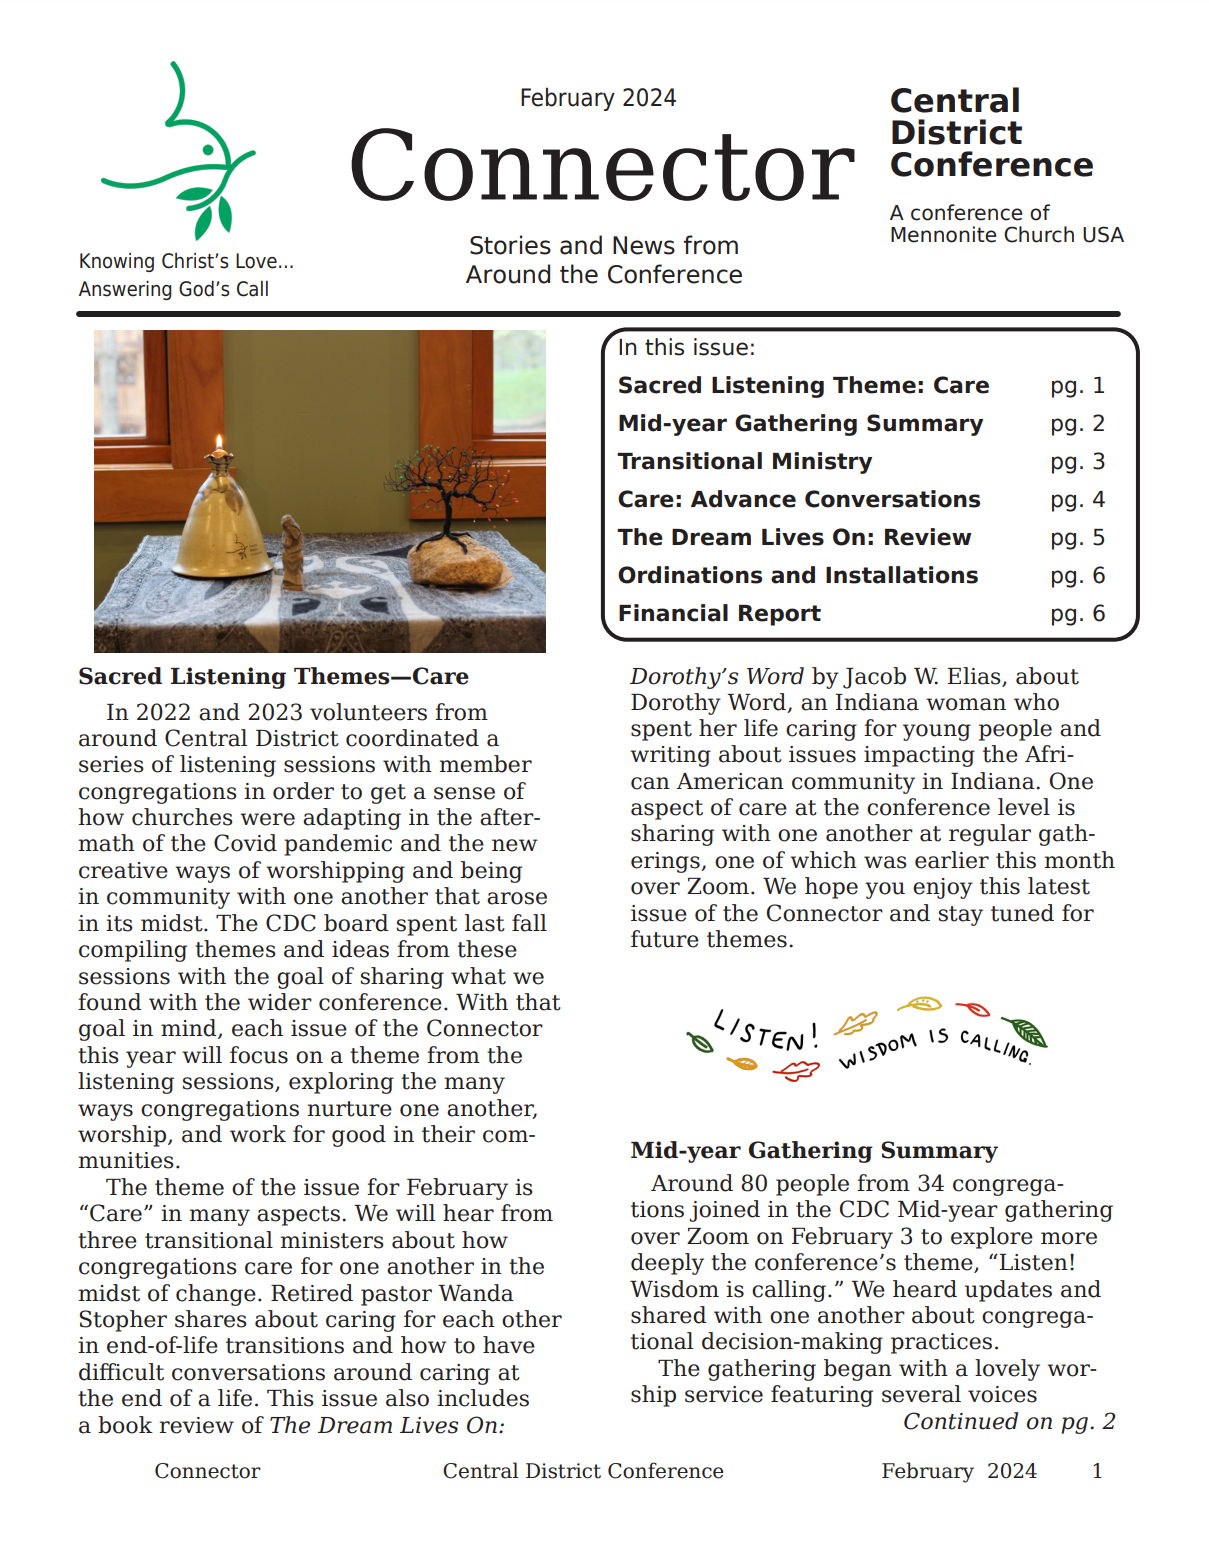 CDC Connector - February 2024 issue